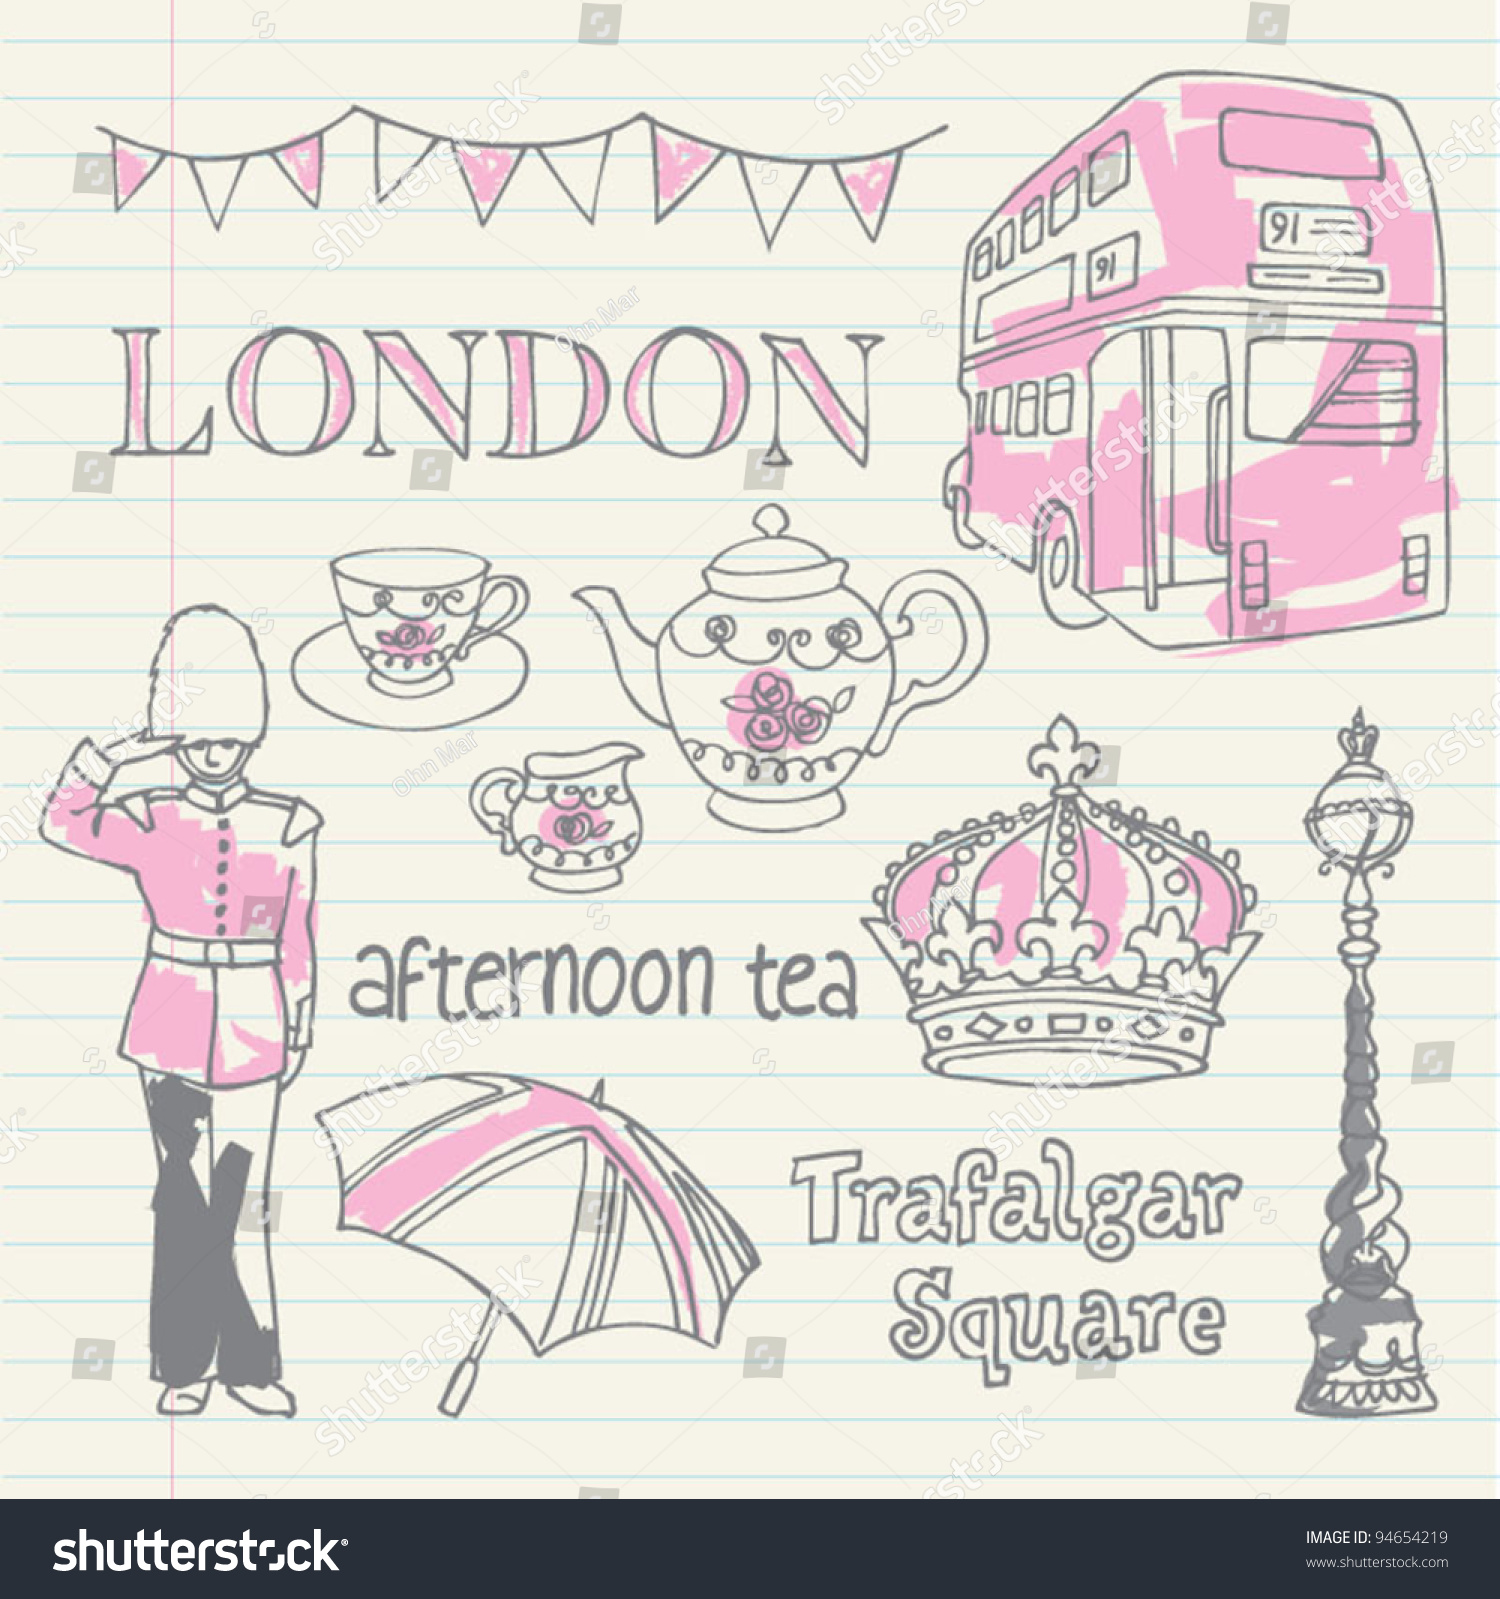 SVG of London icons doodle svg